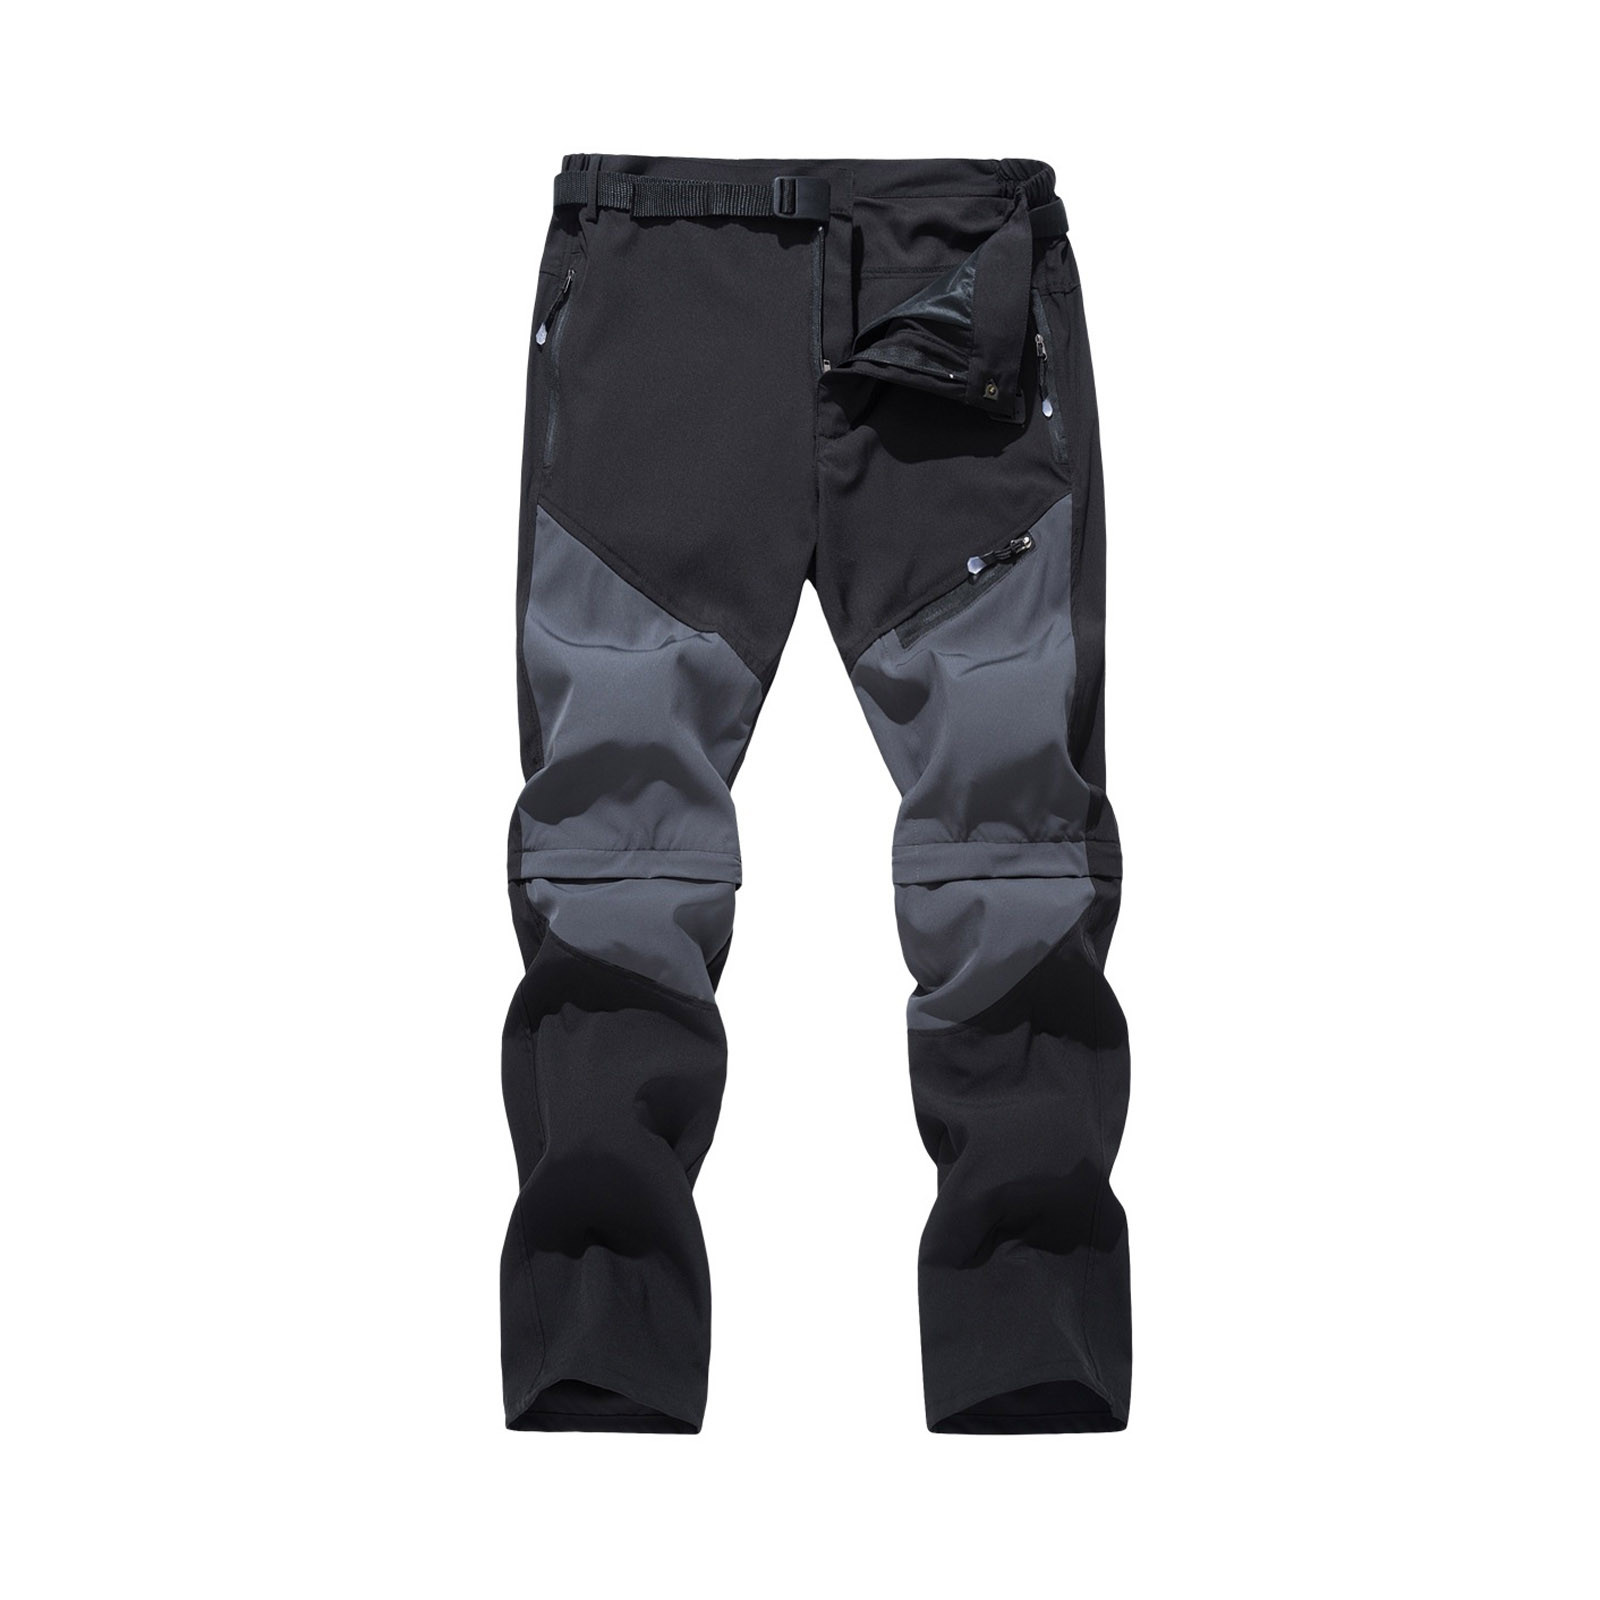 WAENQINLA Mens Cargo Pants Relaxed Fit Athletic Pants Outdoor Military ...